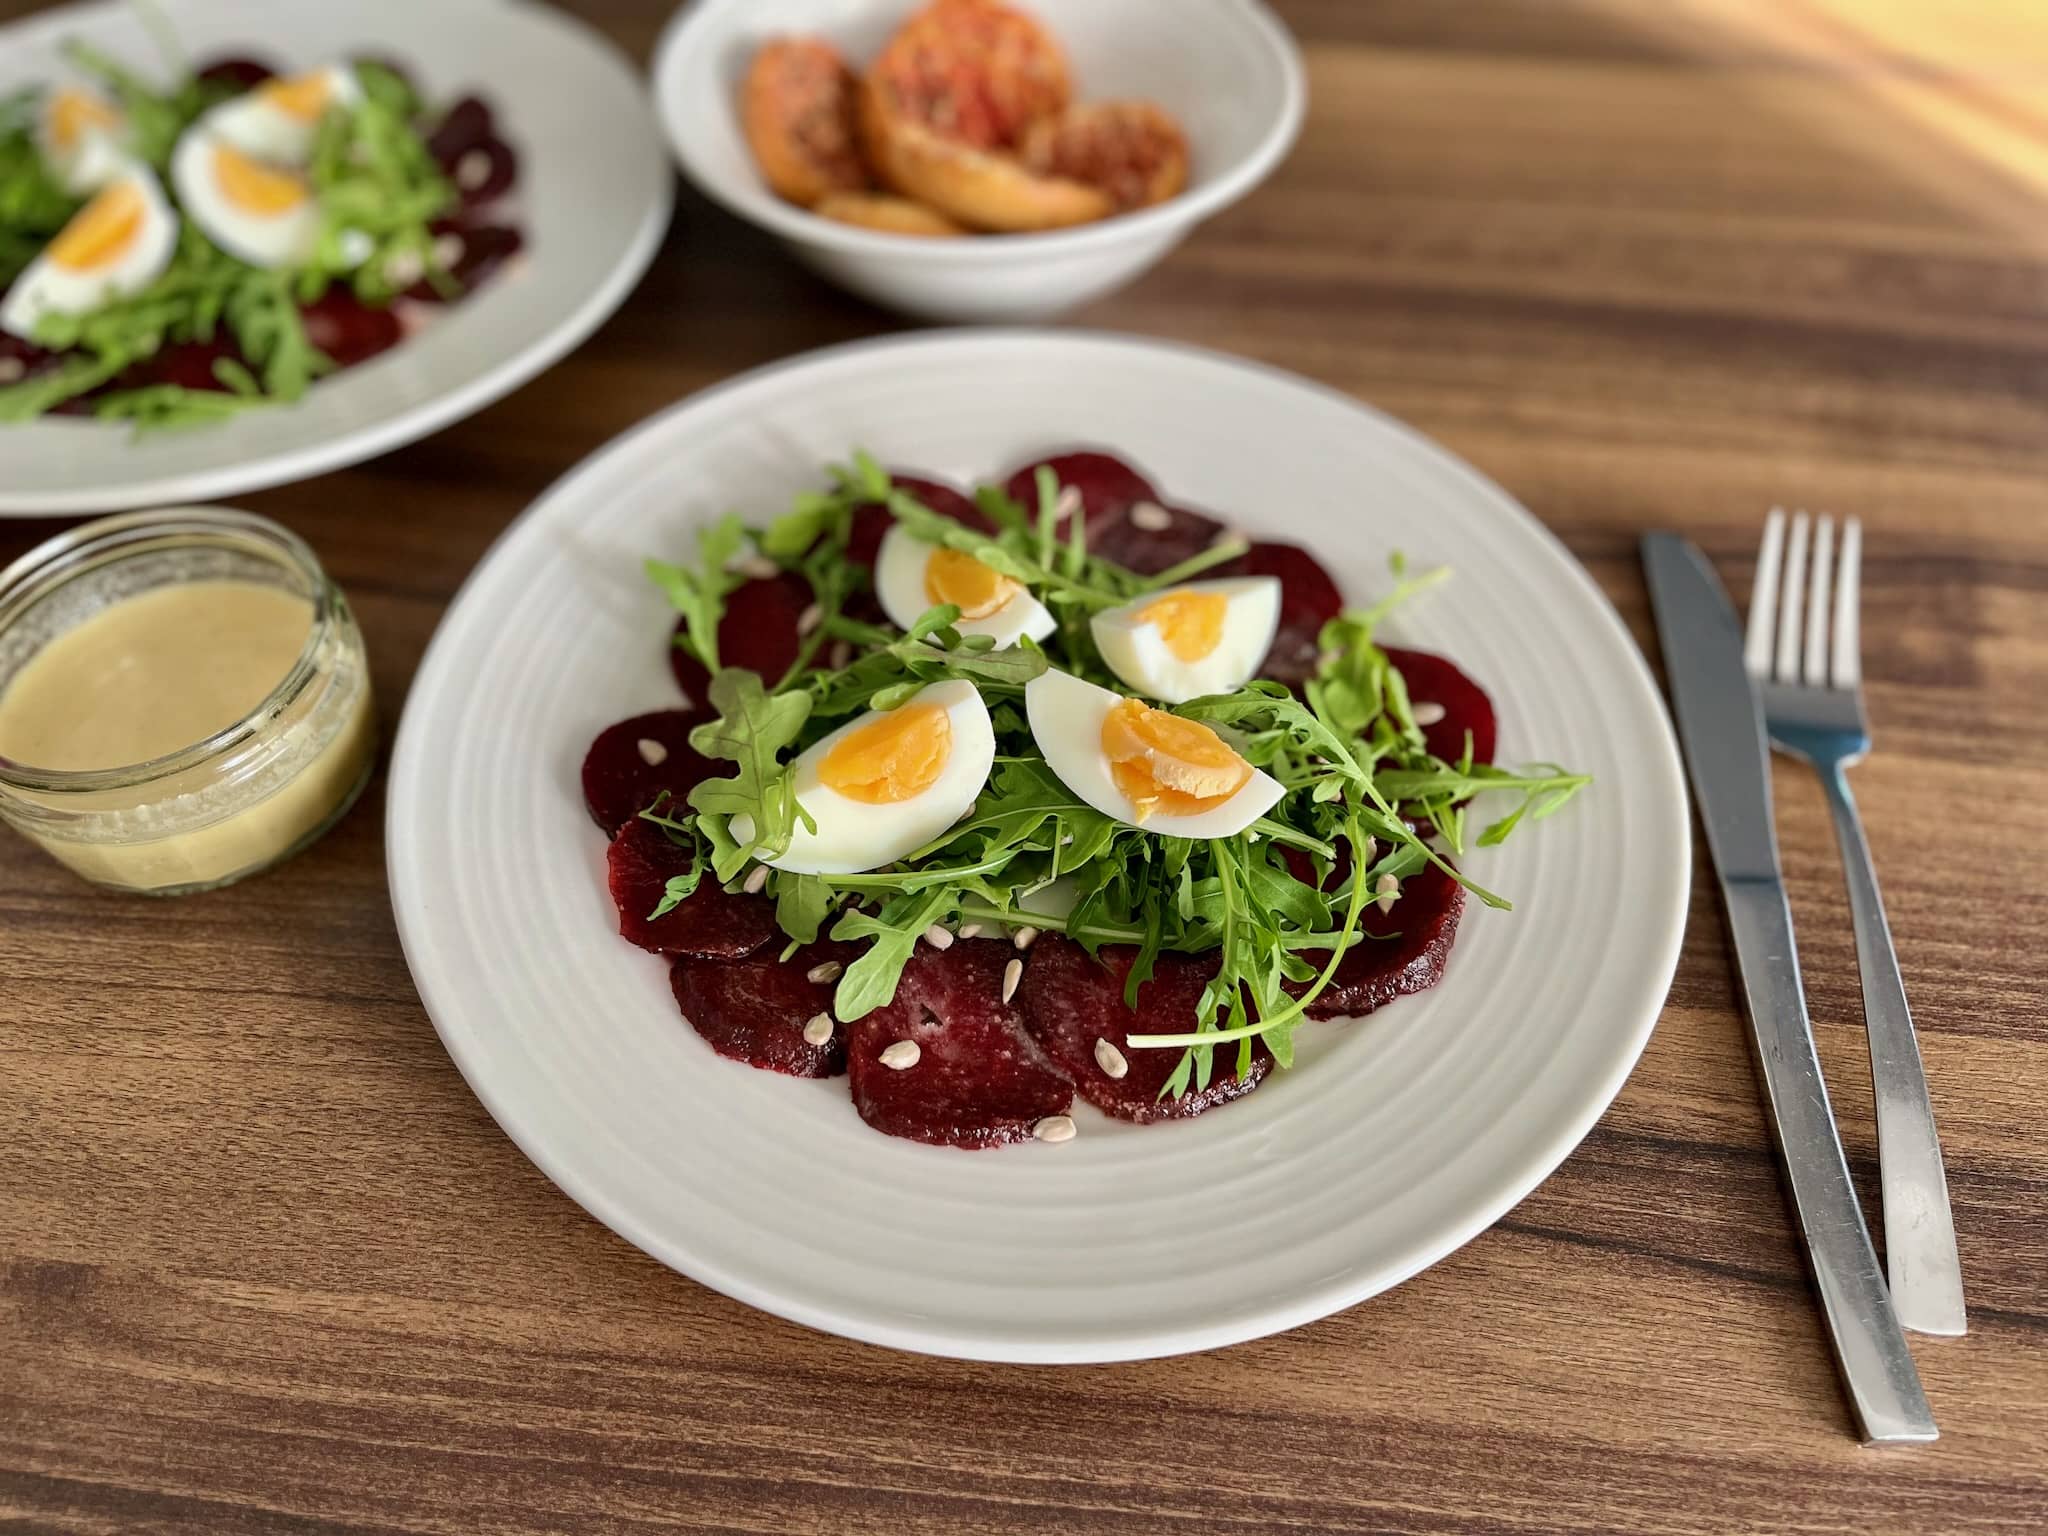 Beetroot Carpaccio with Egg and Wild Rocket